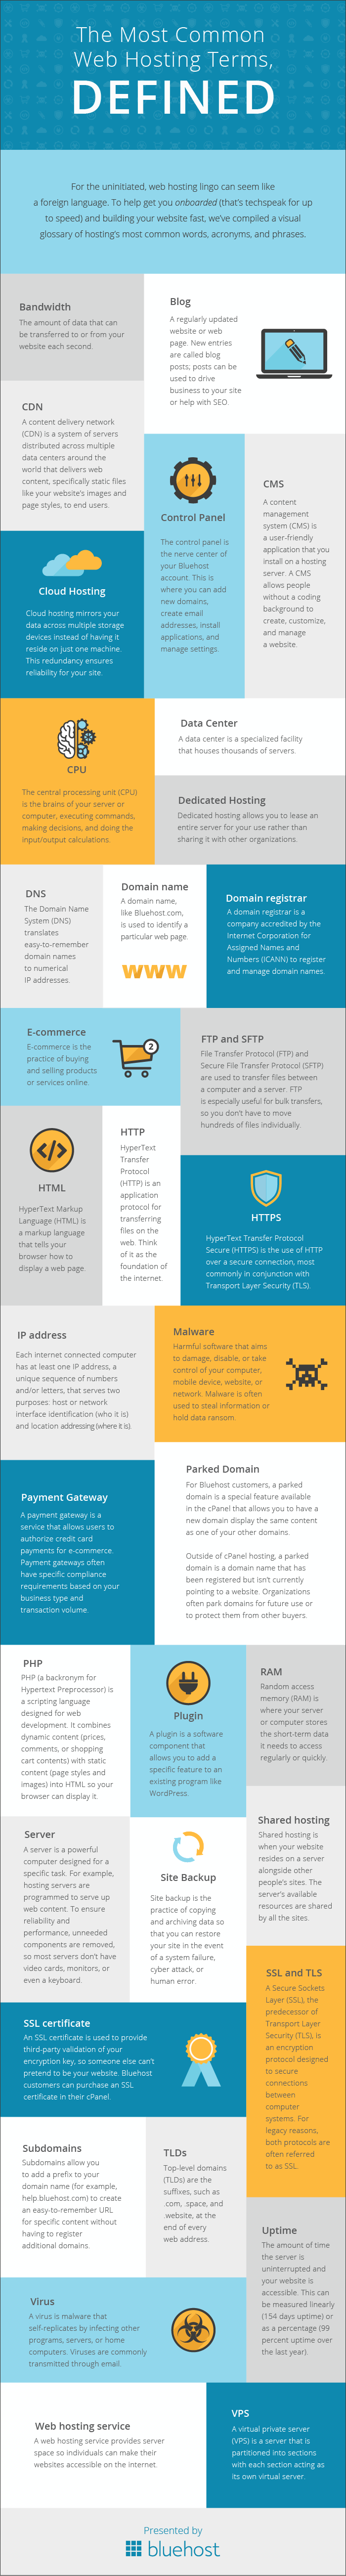 Most-Common-Web-Hosting-terms